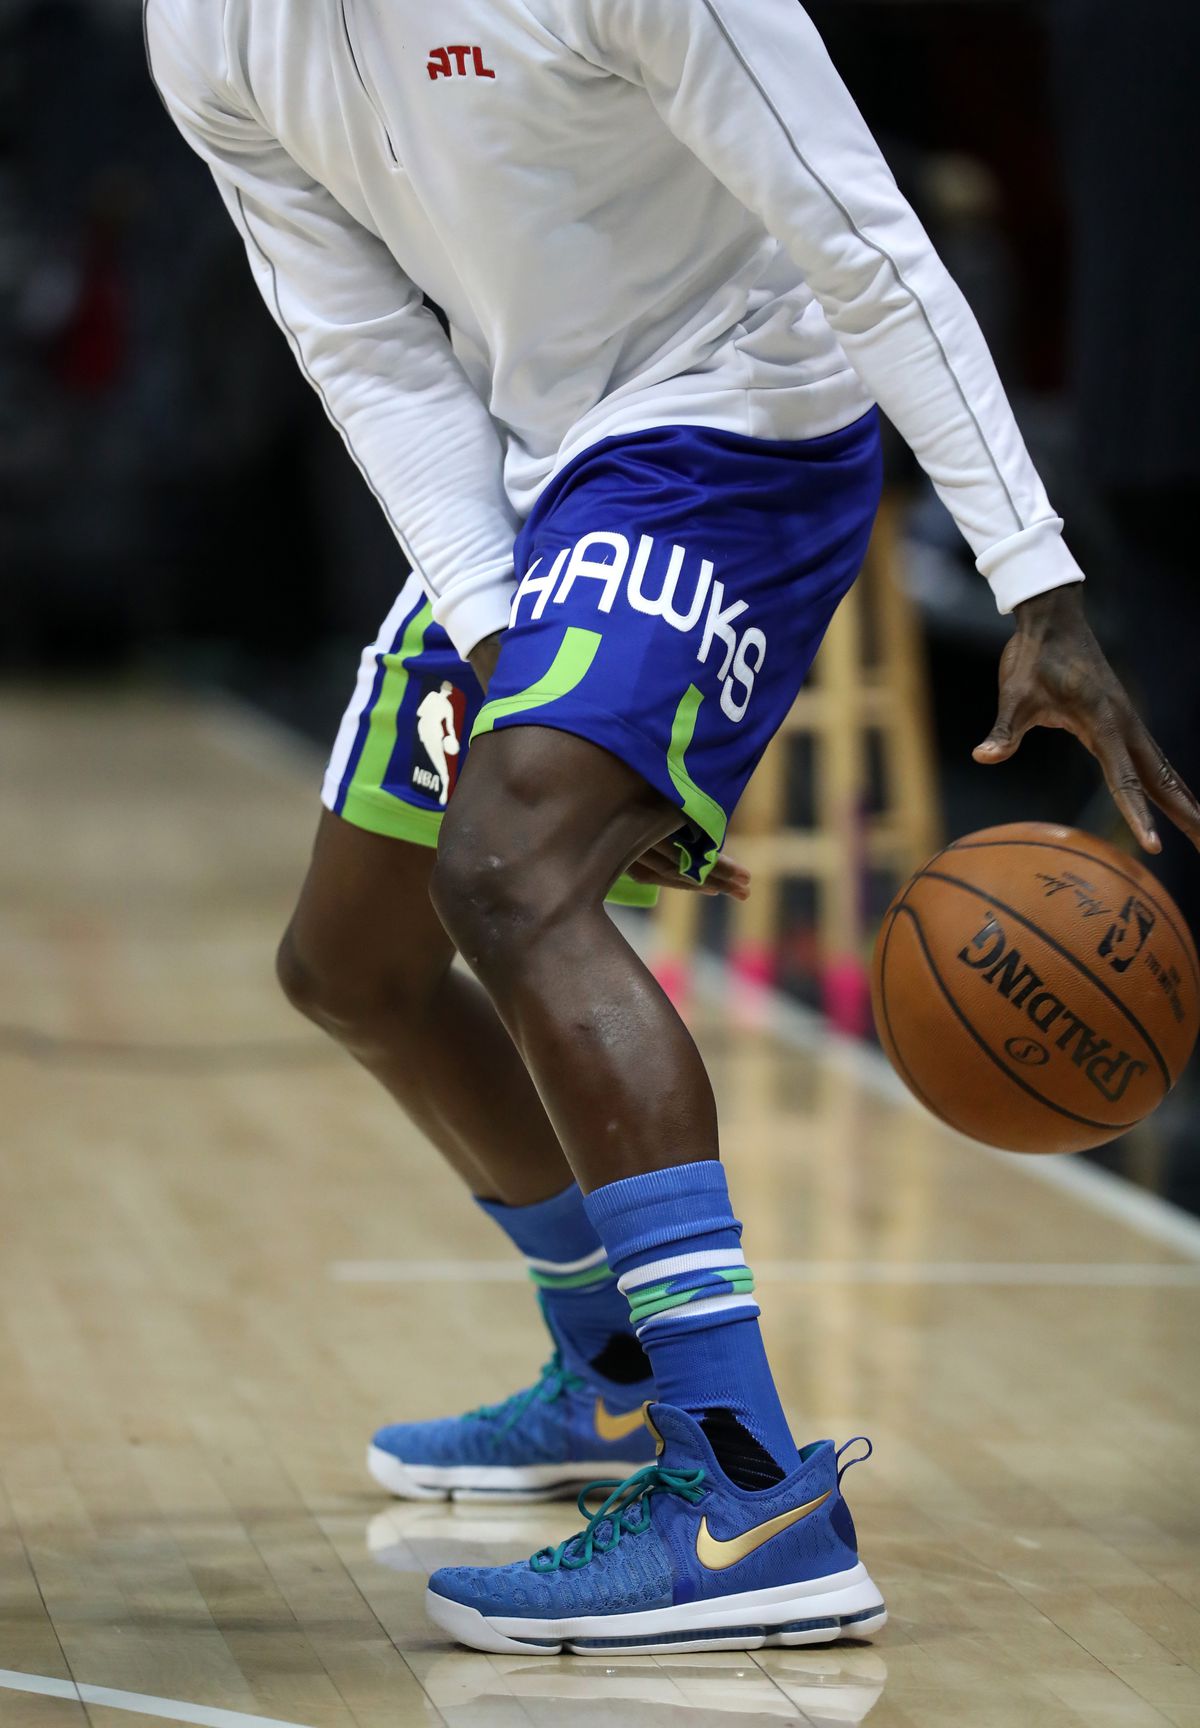 Hawks wore blue and green throwbacks a day before the Seahawks